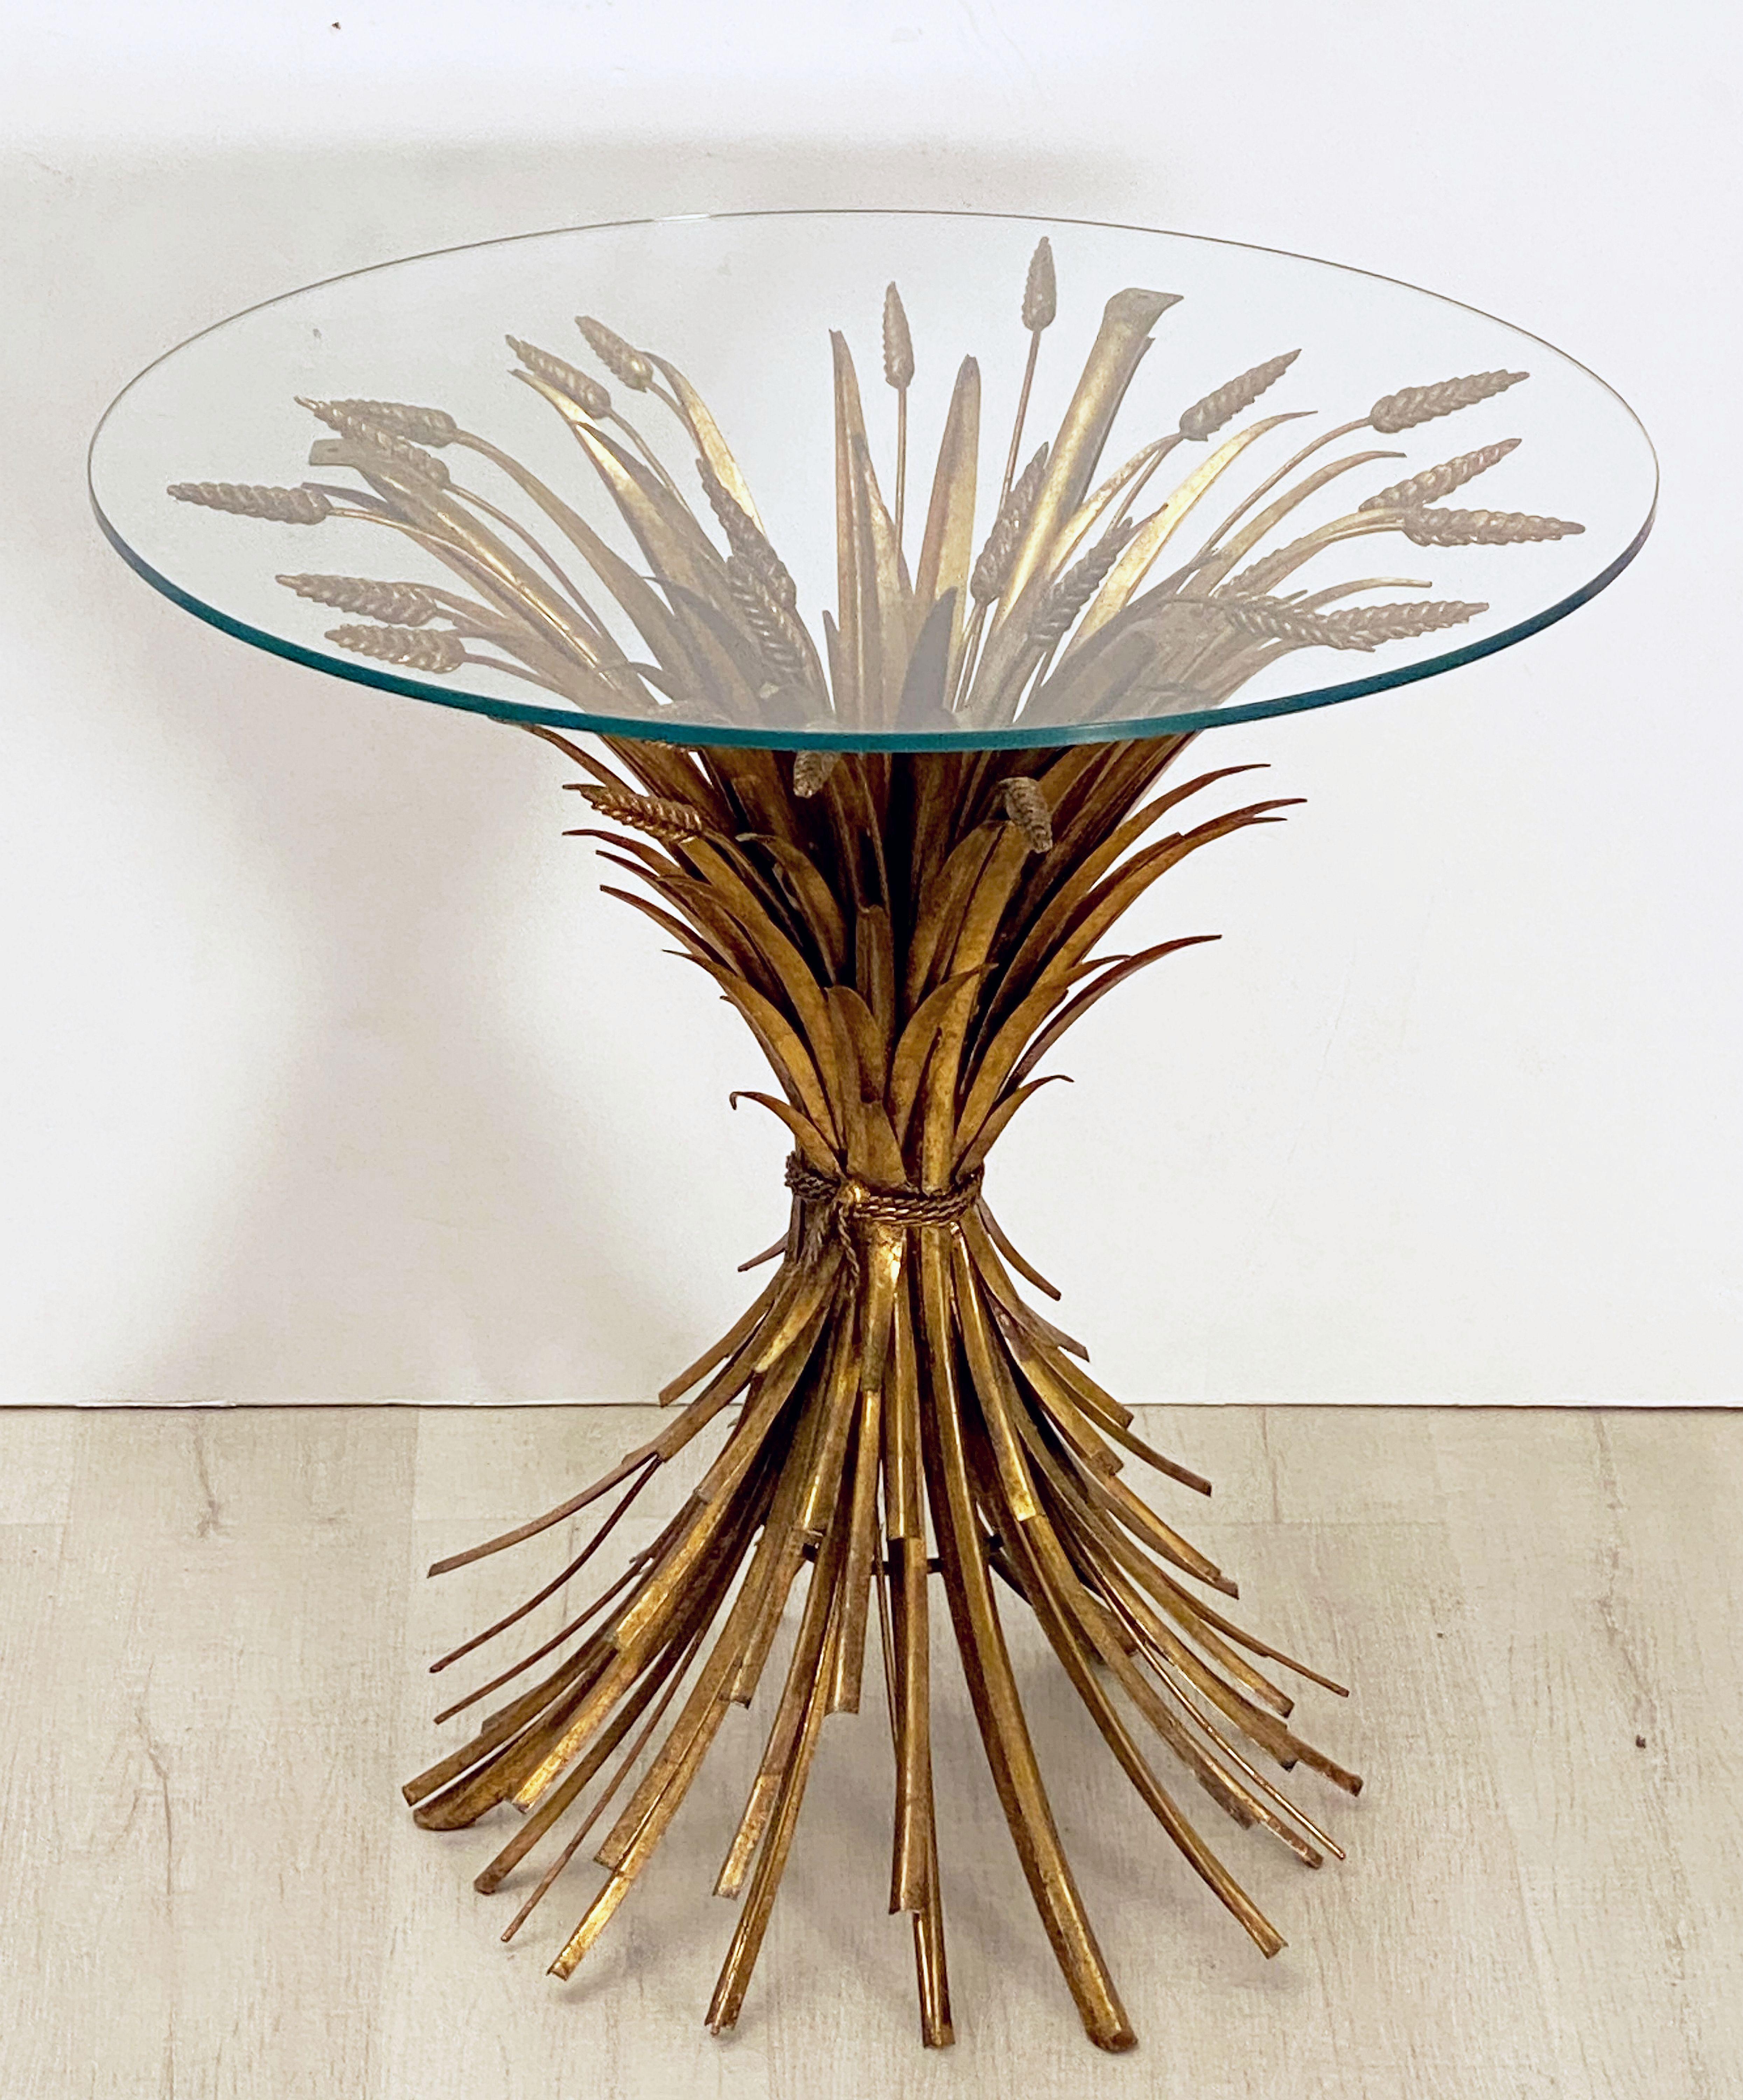 A lovely Italian wheat sheaf cocktail table and chairs set by S. Salvadori - Firenze. 
Featuring a wheat sheaf bistro table of gilt metal with a round glass top and a matching pair of chairs with elegantly detailed backs in the design of a sheaf of